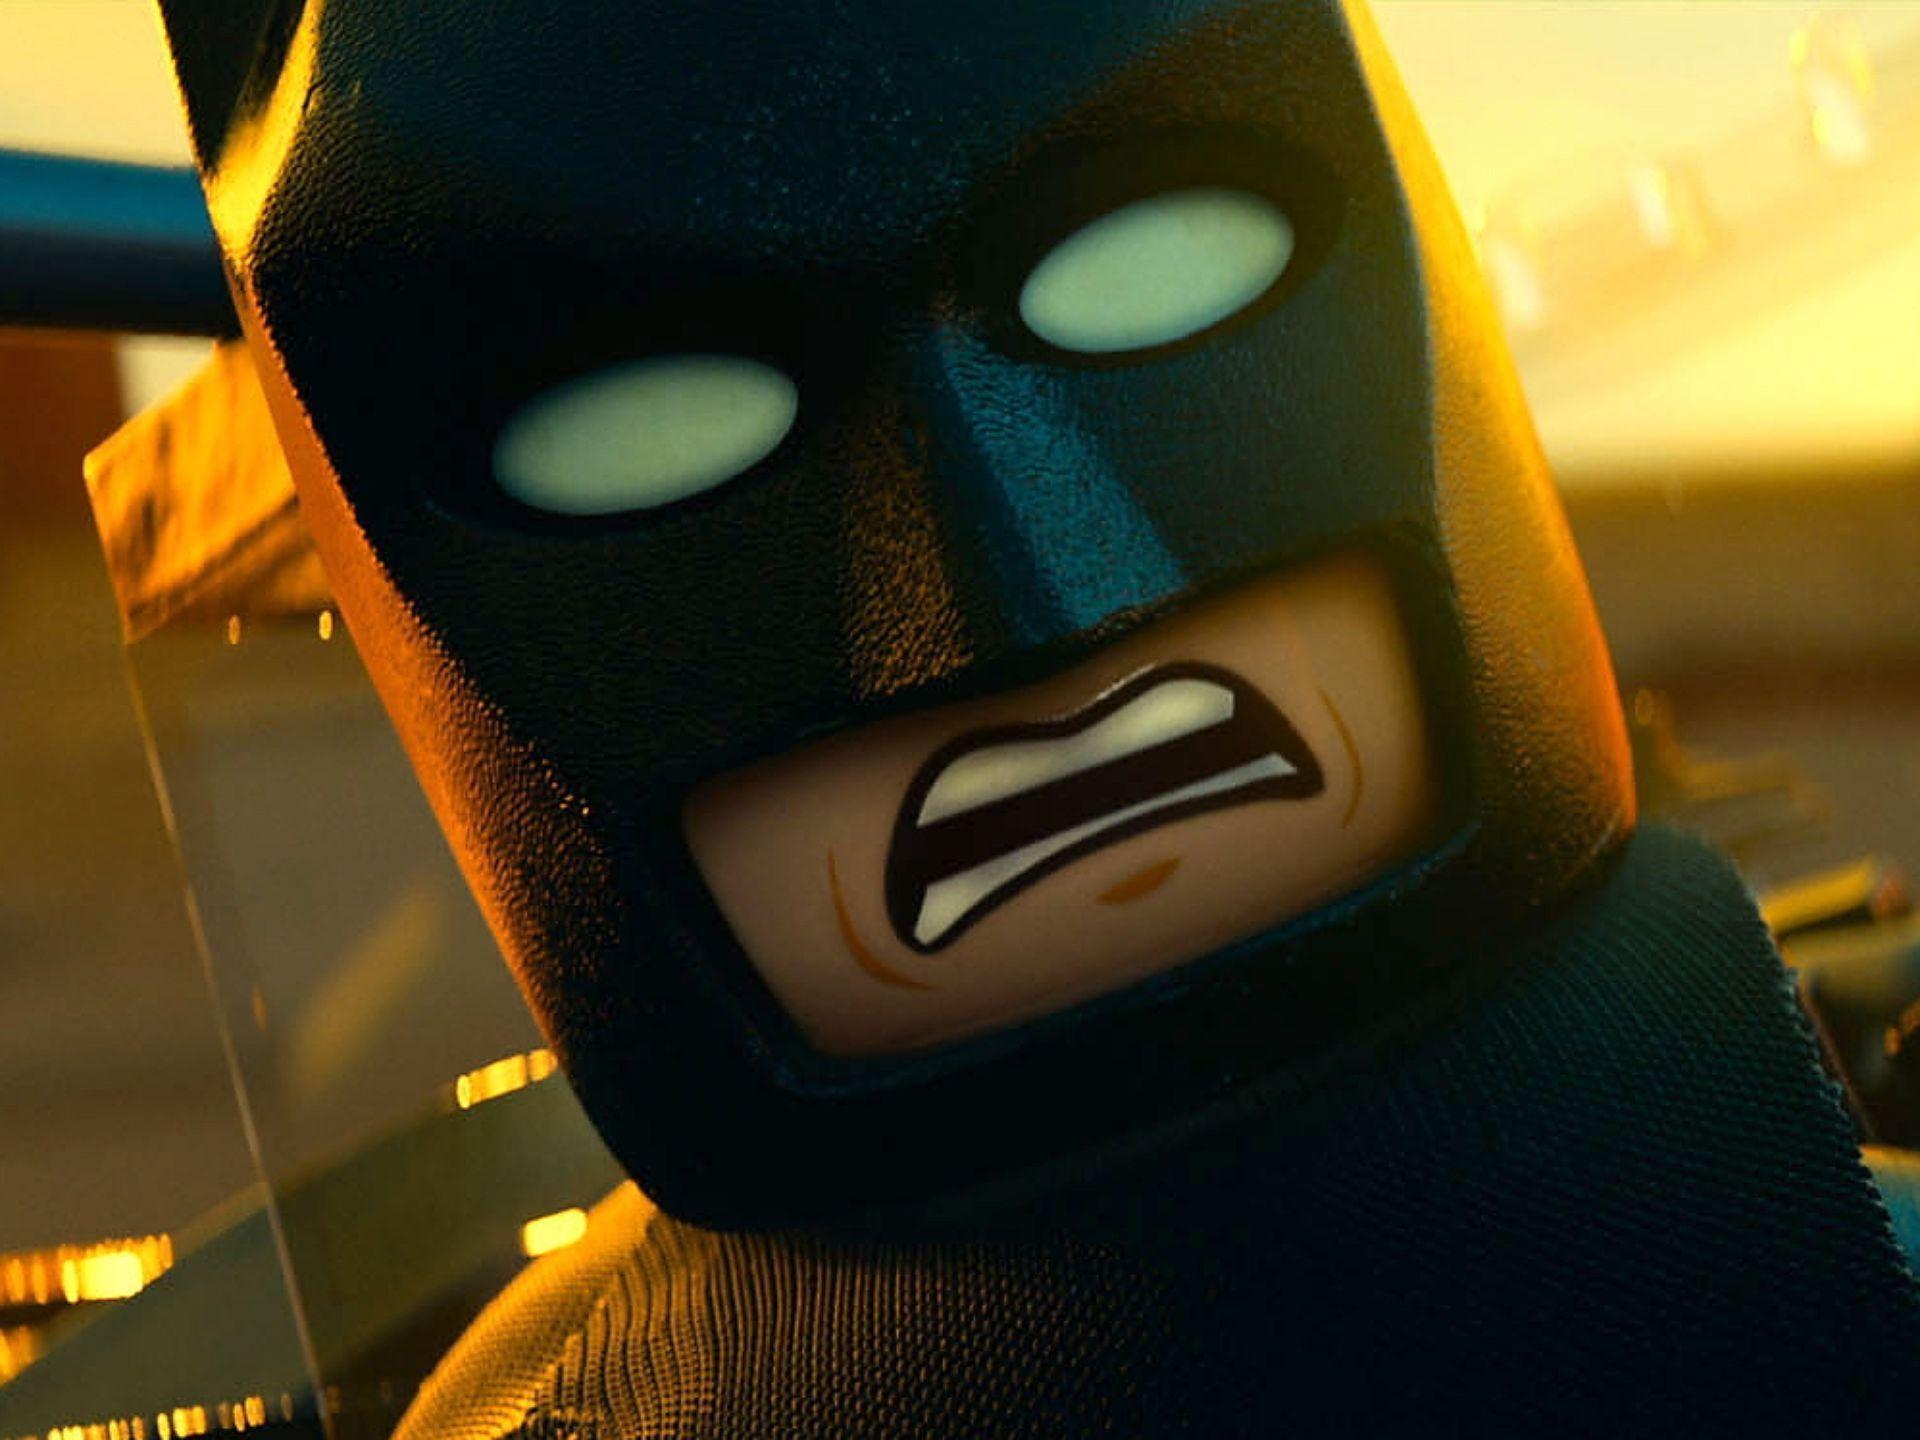 See Lego Batman Movie's First Image Here, They're Very Cool